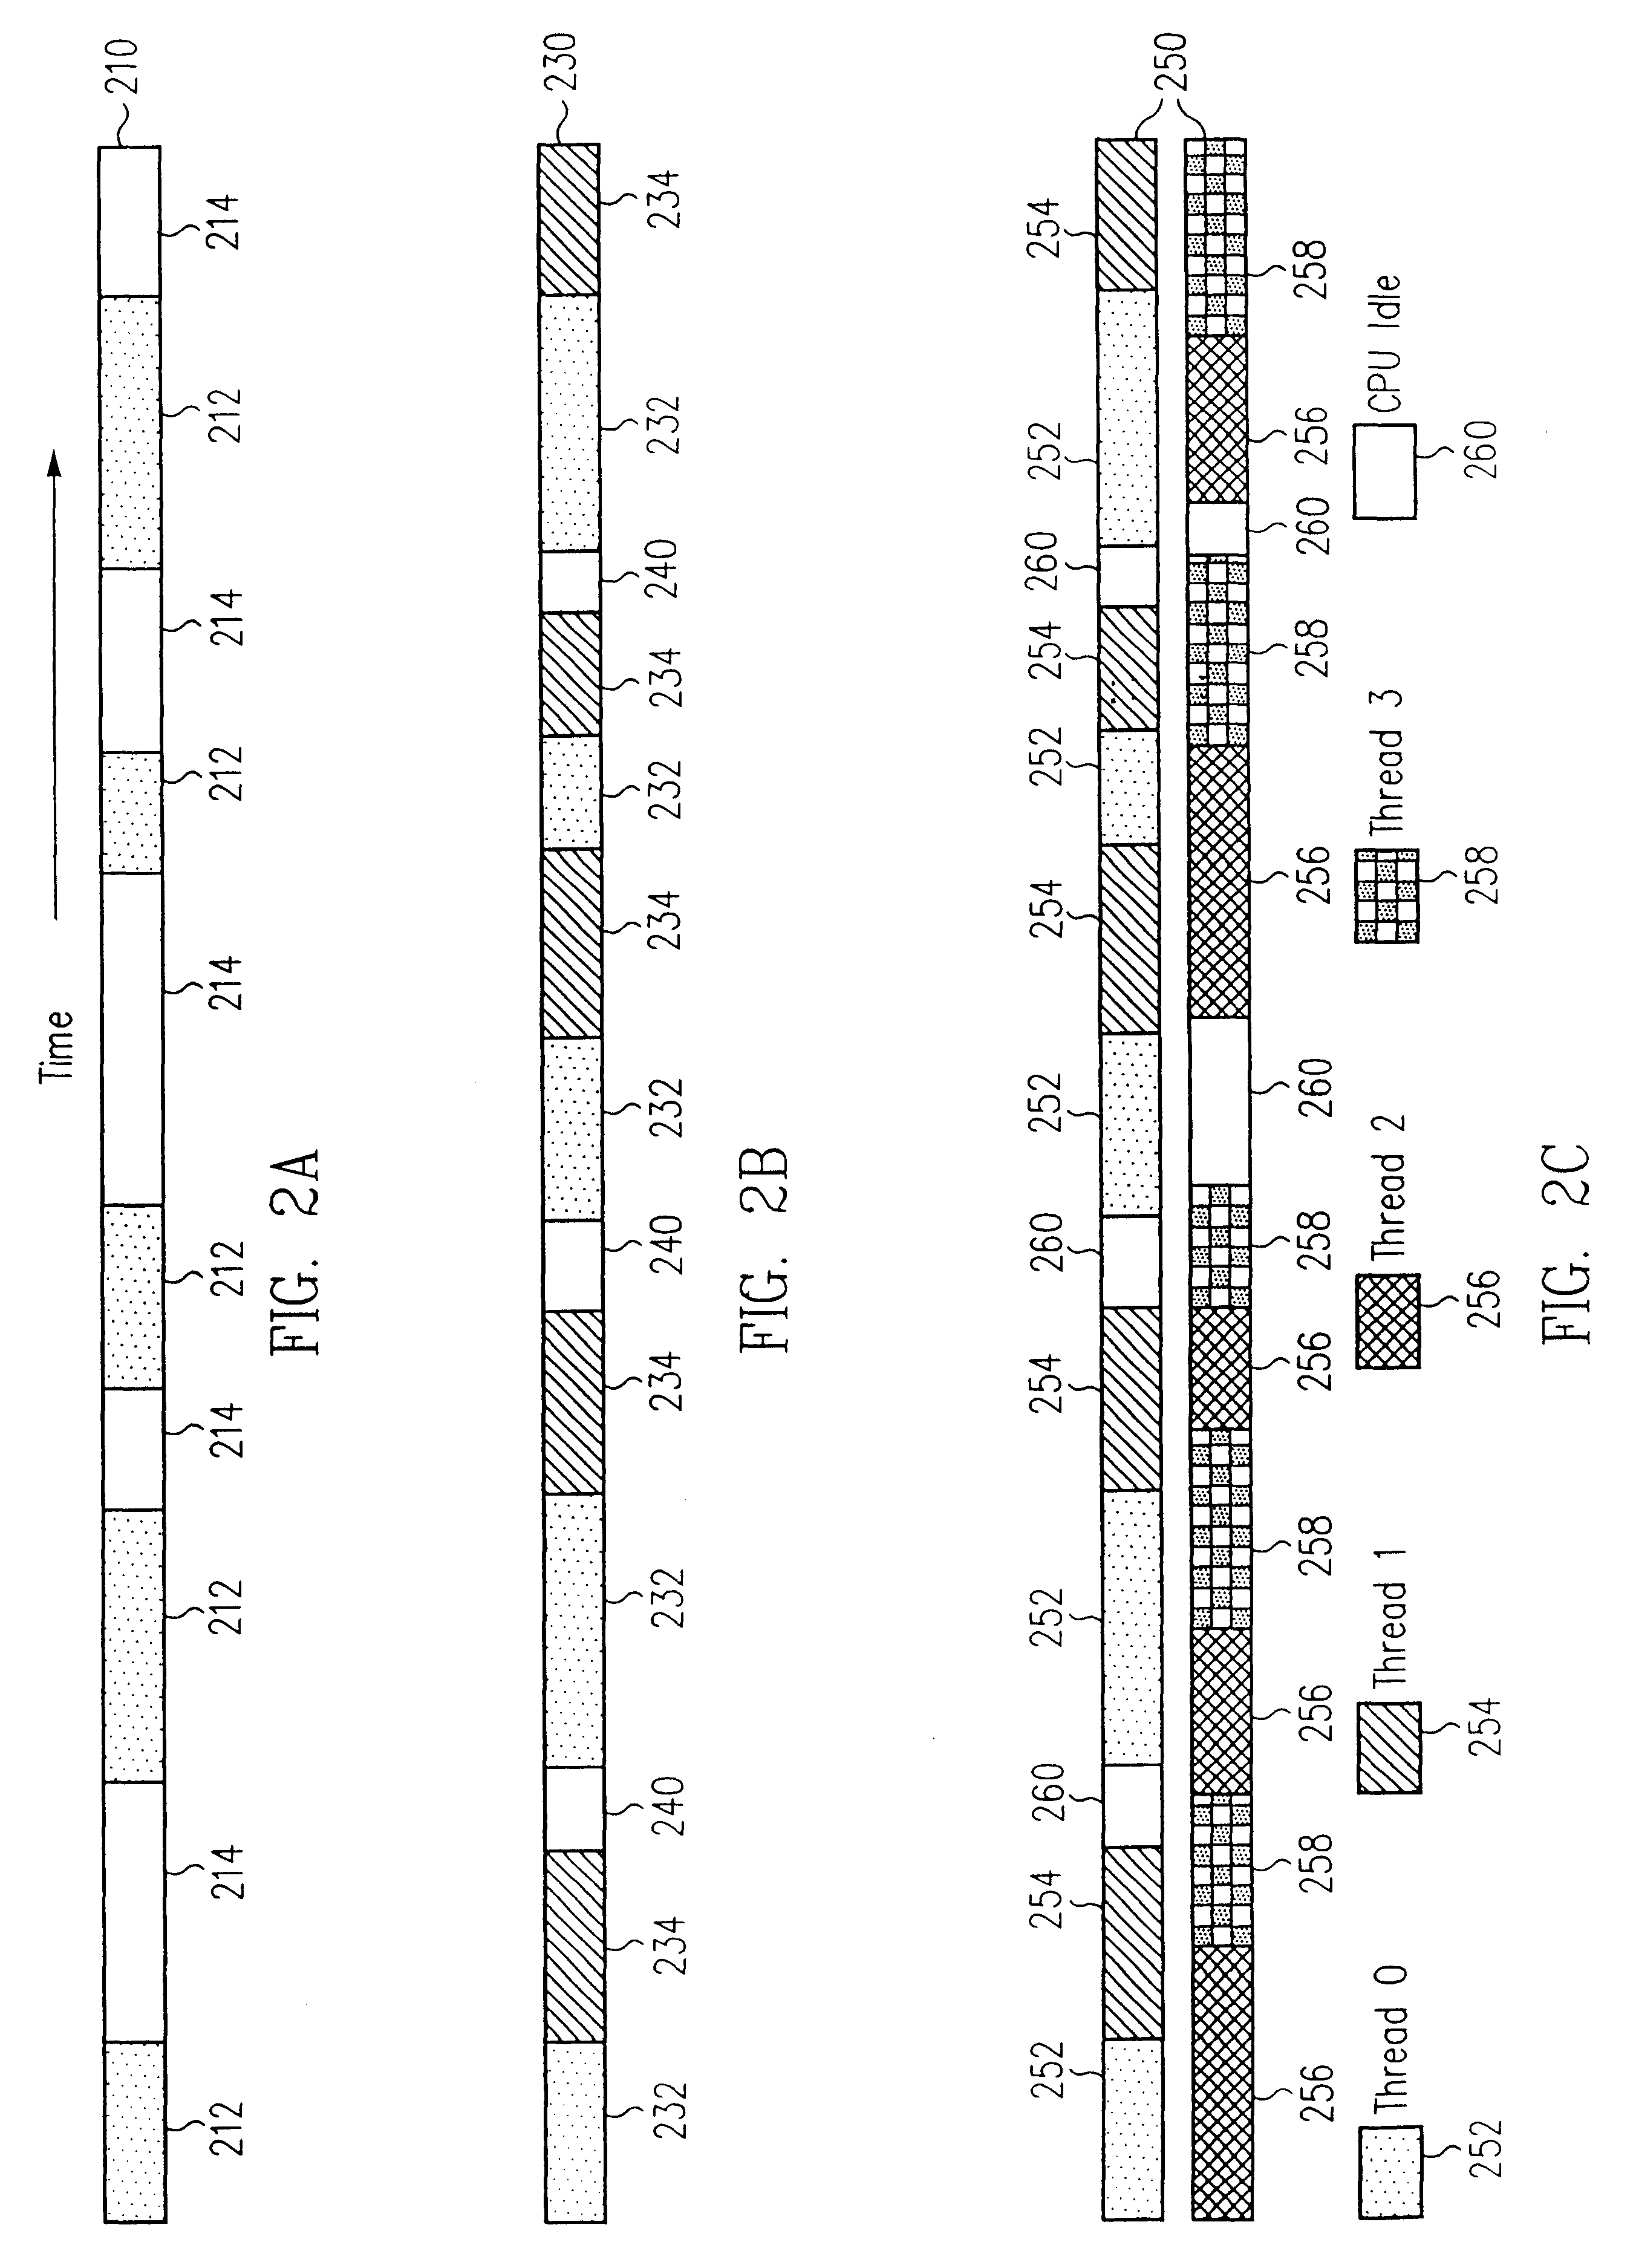 Switching method in a multi-threaded processor